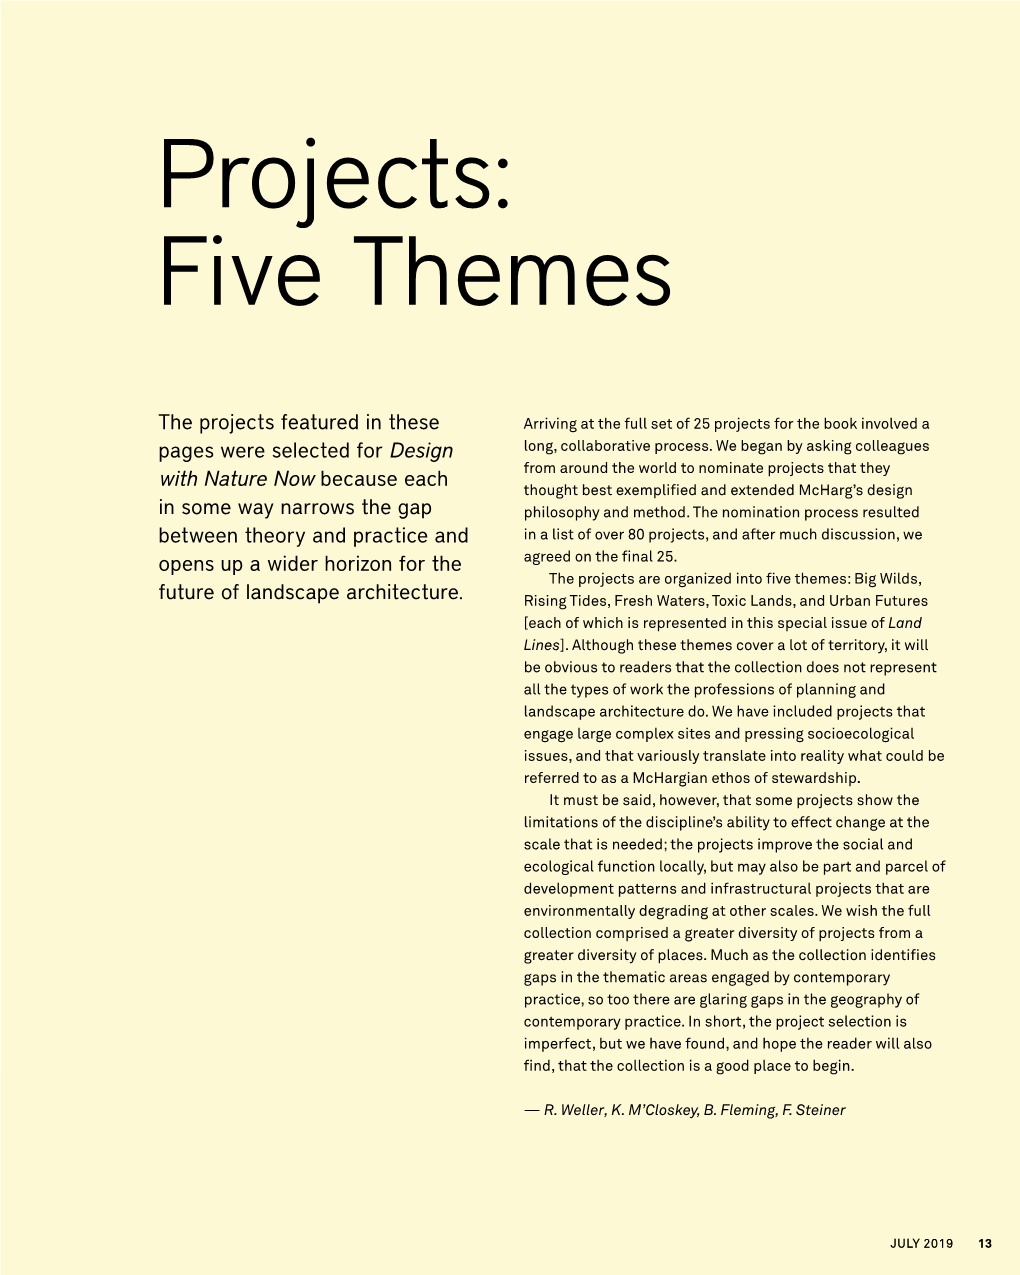 Projects: Five Themes